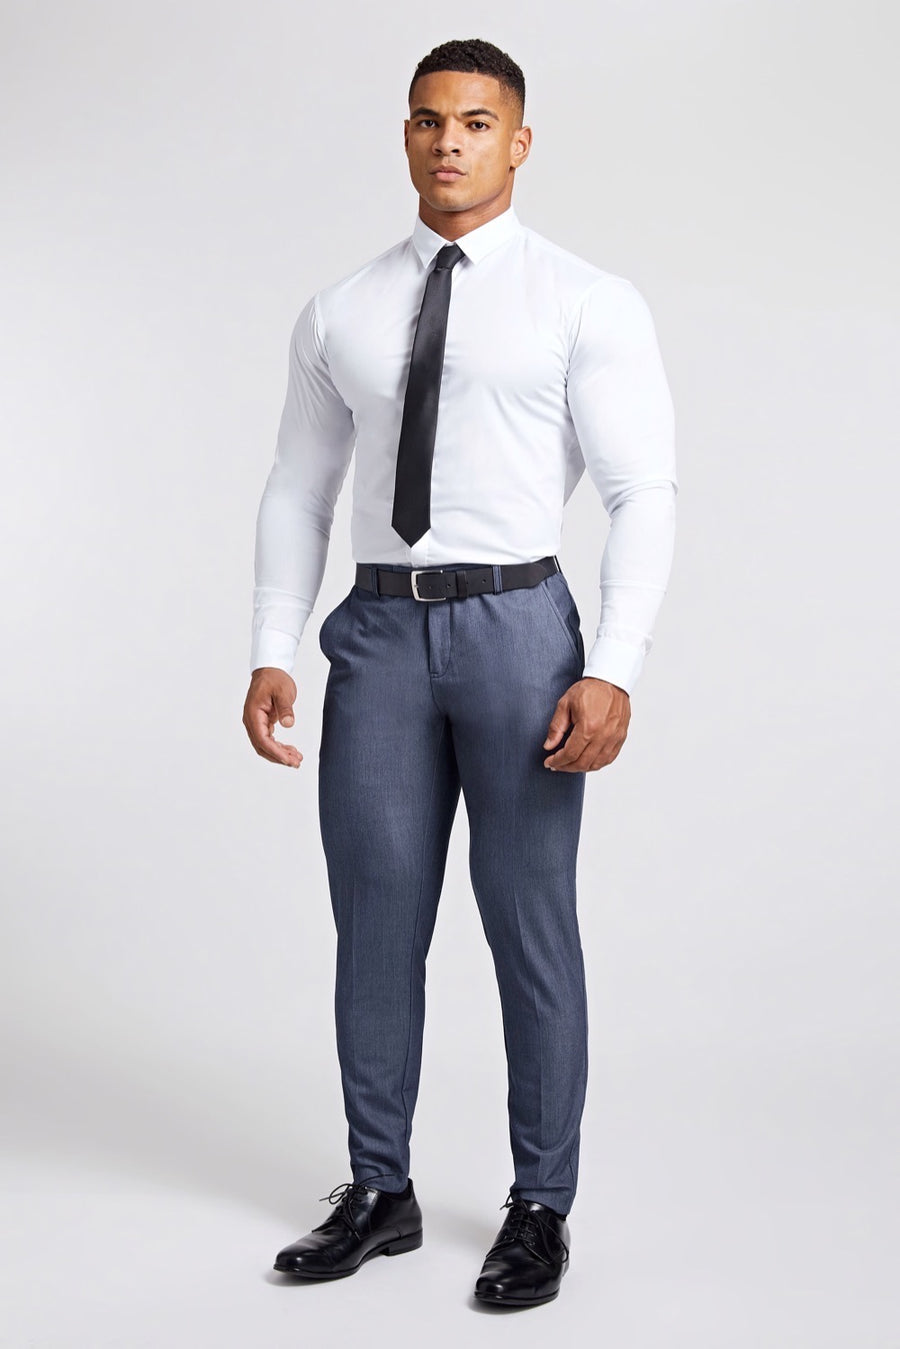 Athletic Fit Pants in Chambray - TAILORED ATHLETE - USA